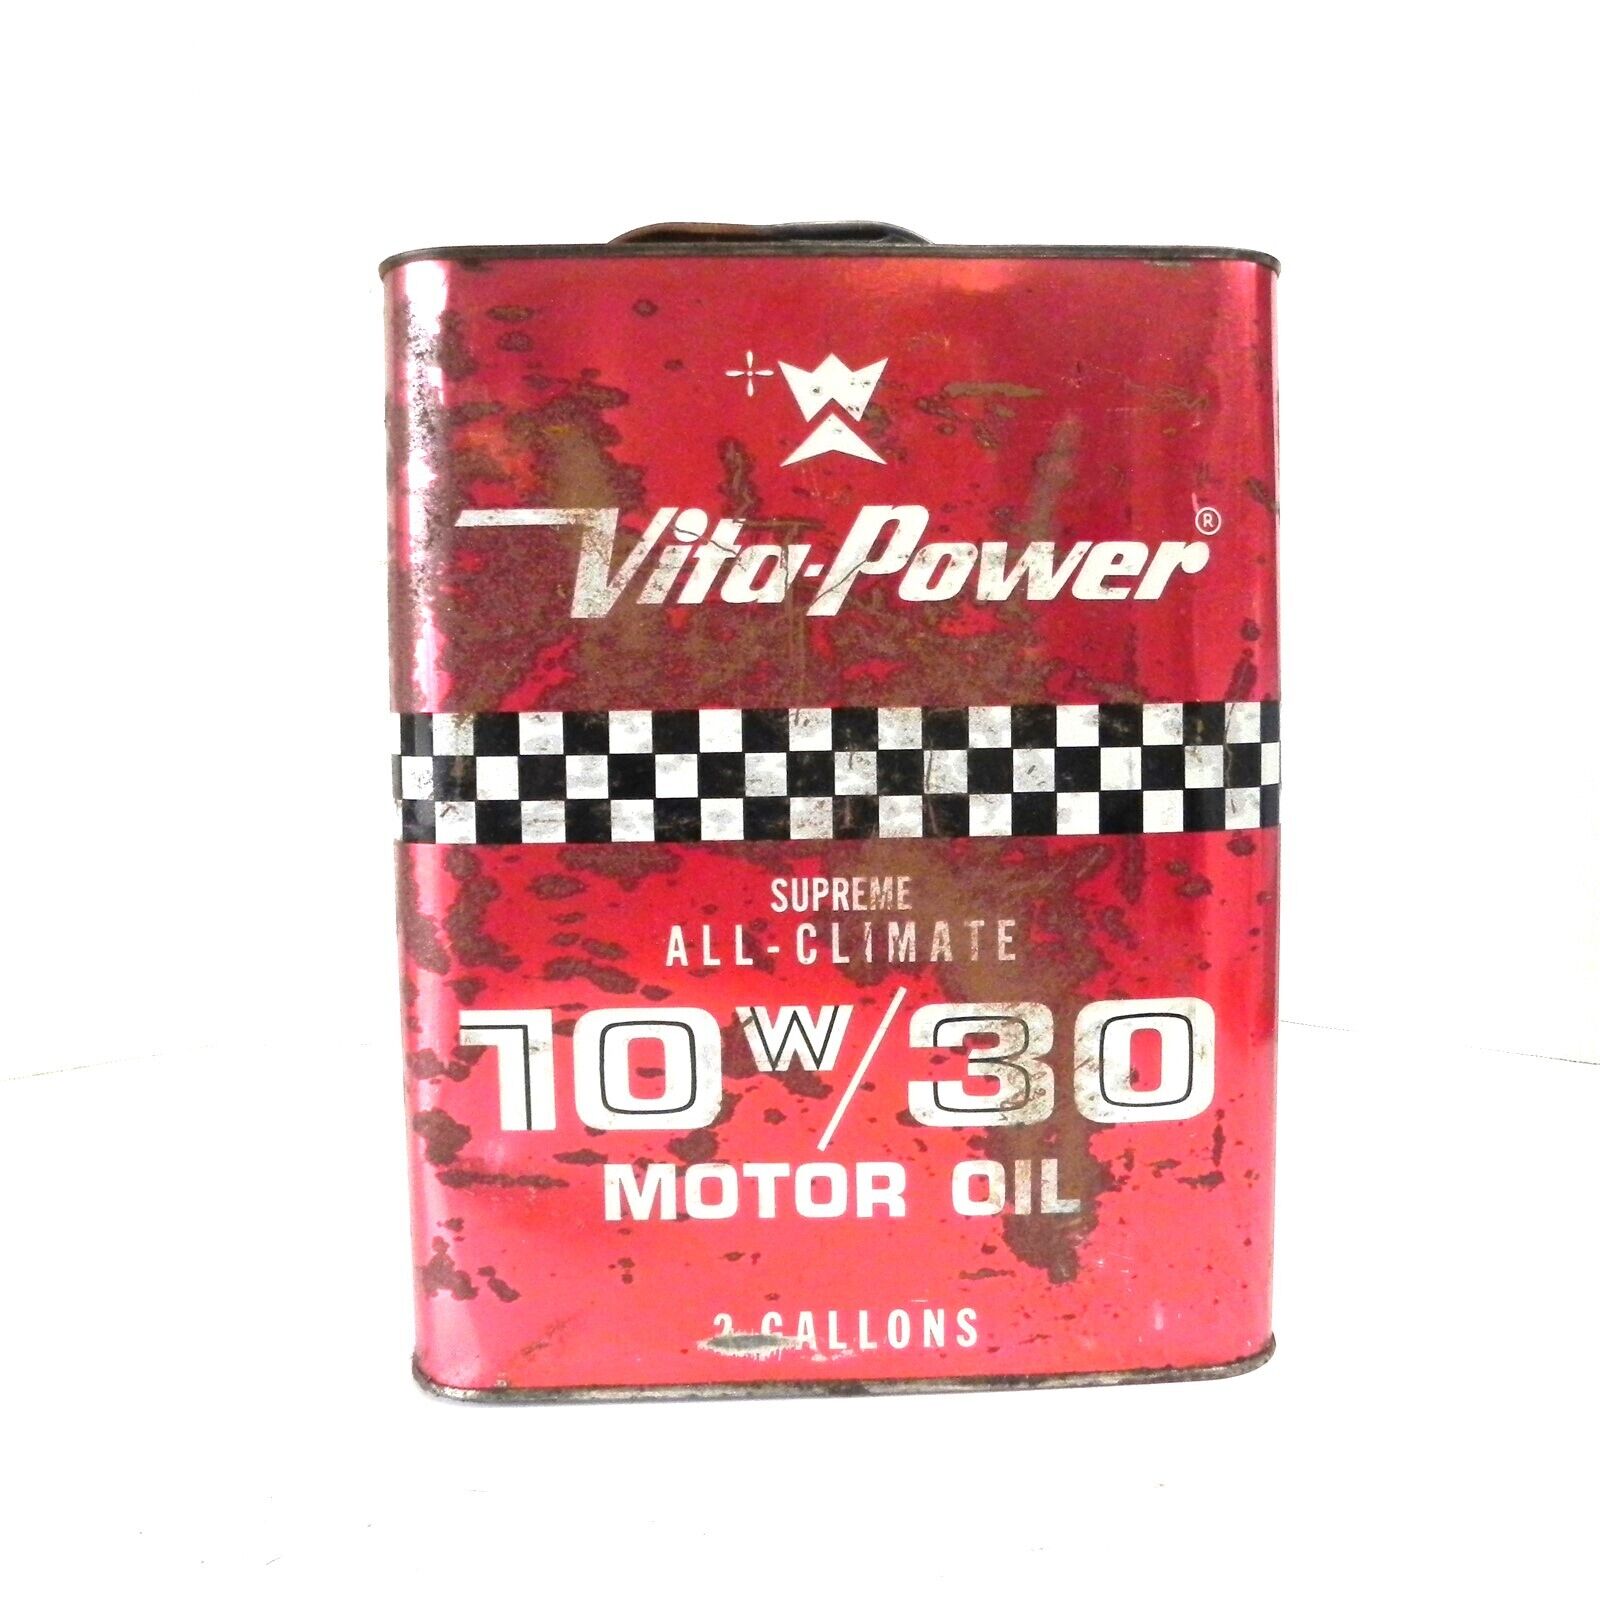 VINTAGE VITA-POWER 10W-30 MOTOR OIL 2 GALLON CAN EMPTY USED COLLECTABLE OIL CAN